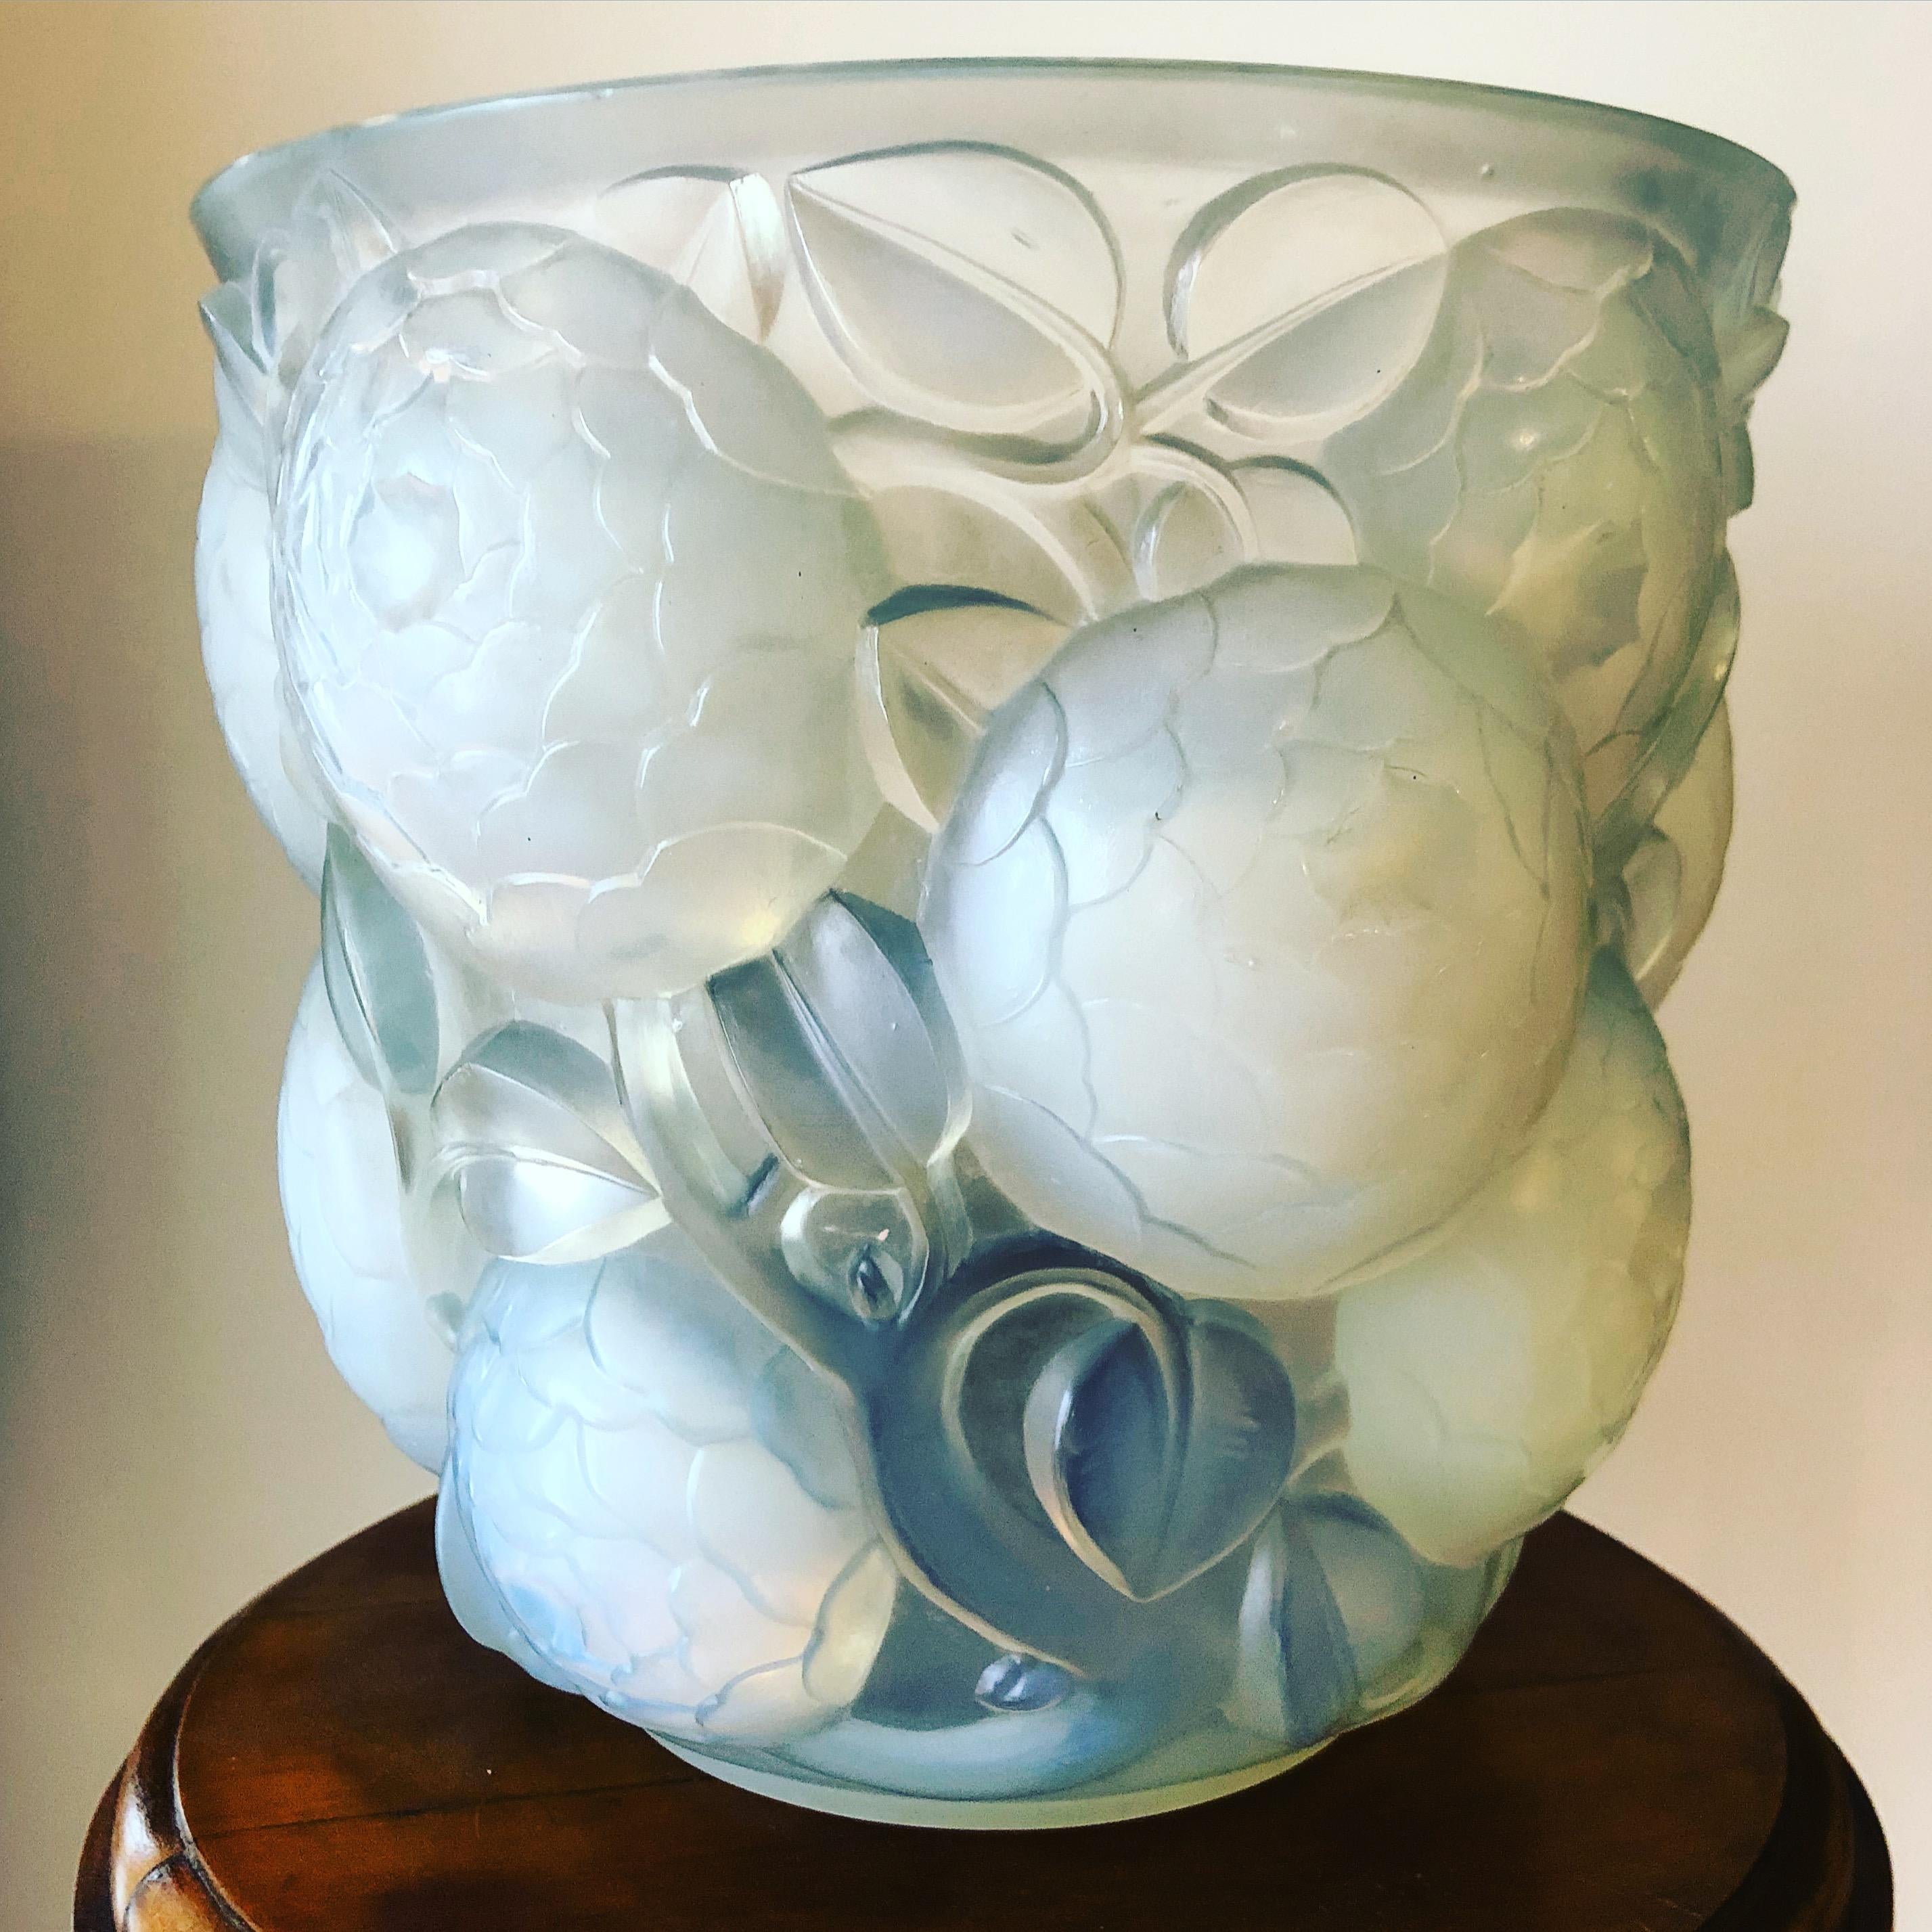 French 1927 Rene Lalique Oran Vase in Opalescent Glass